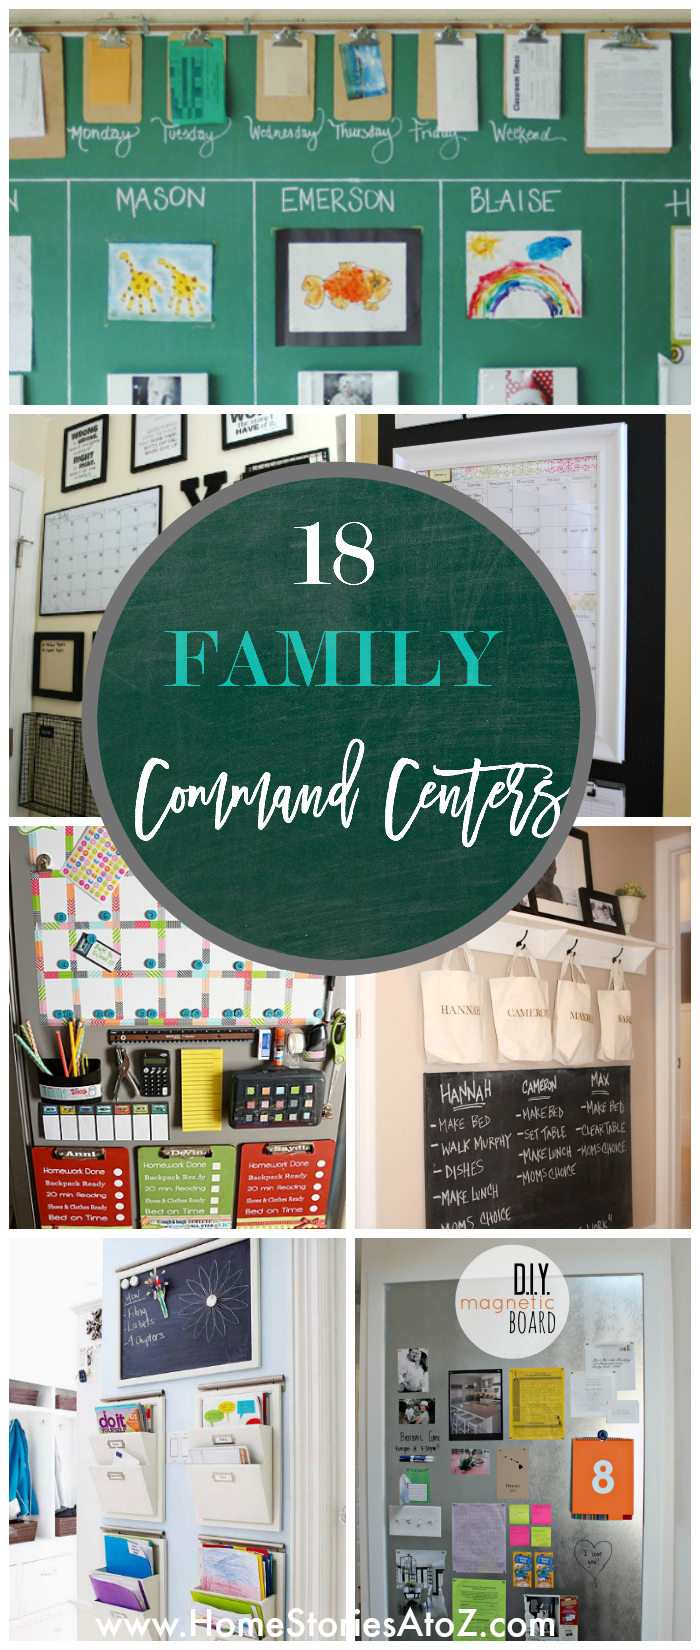 Family Command Center Ideas And Free Organization Printables